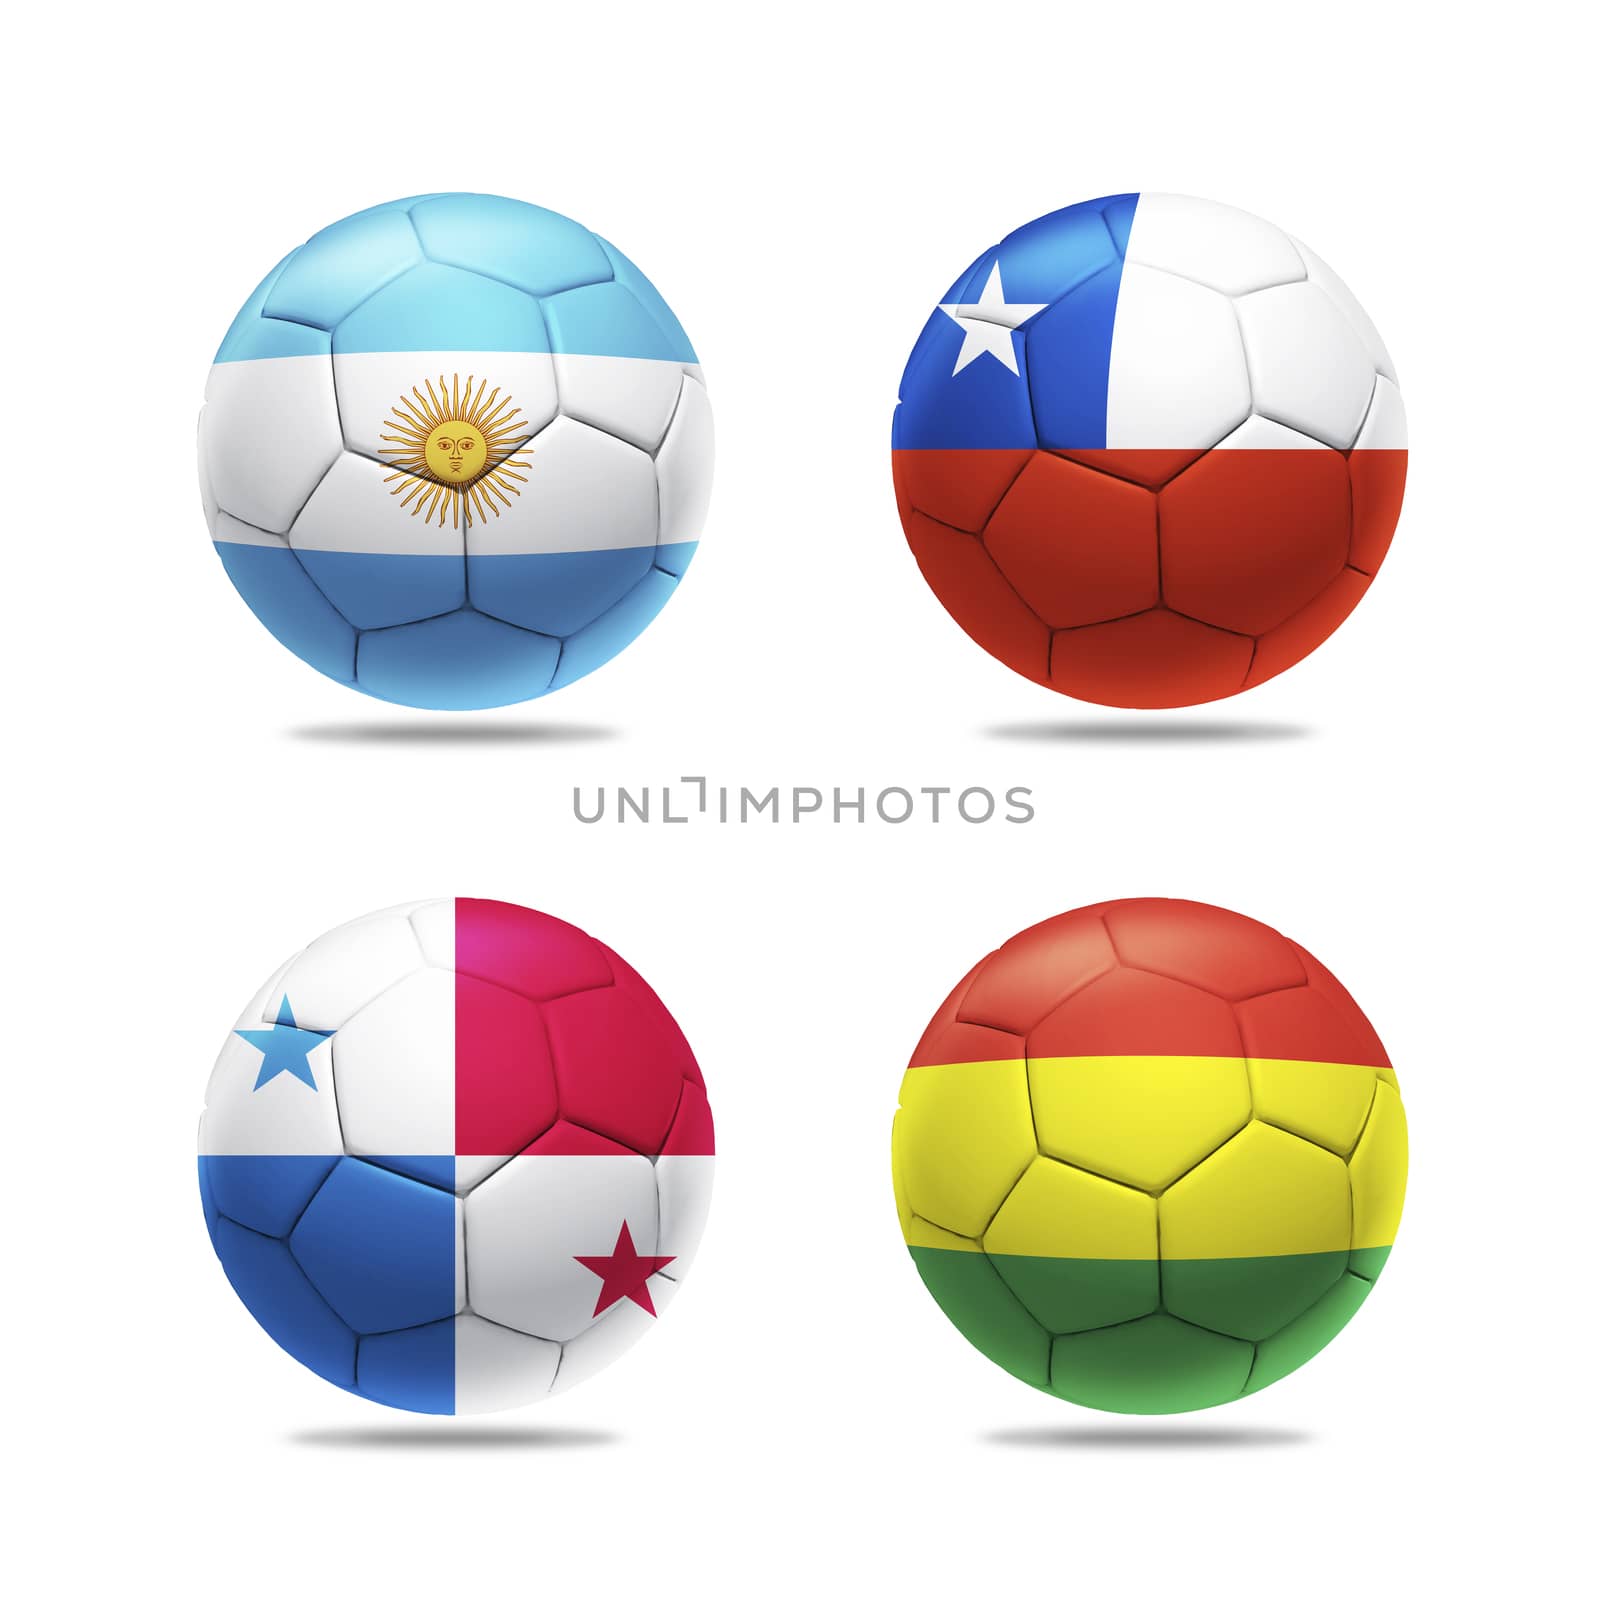 3D soccer ball with group D teams flags, isolated on white